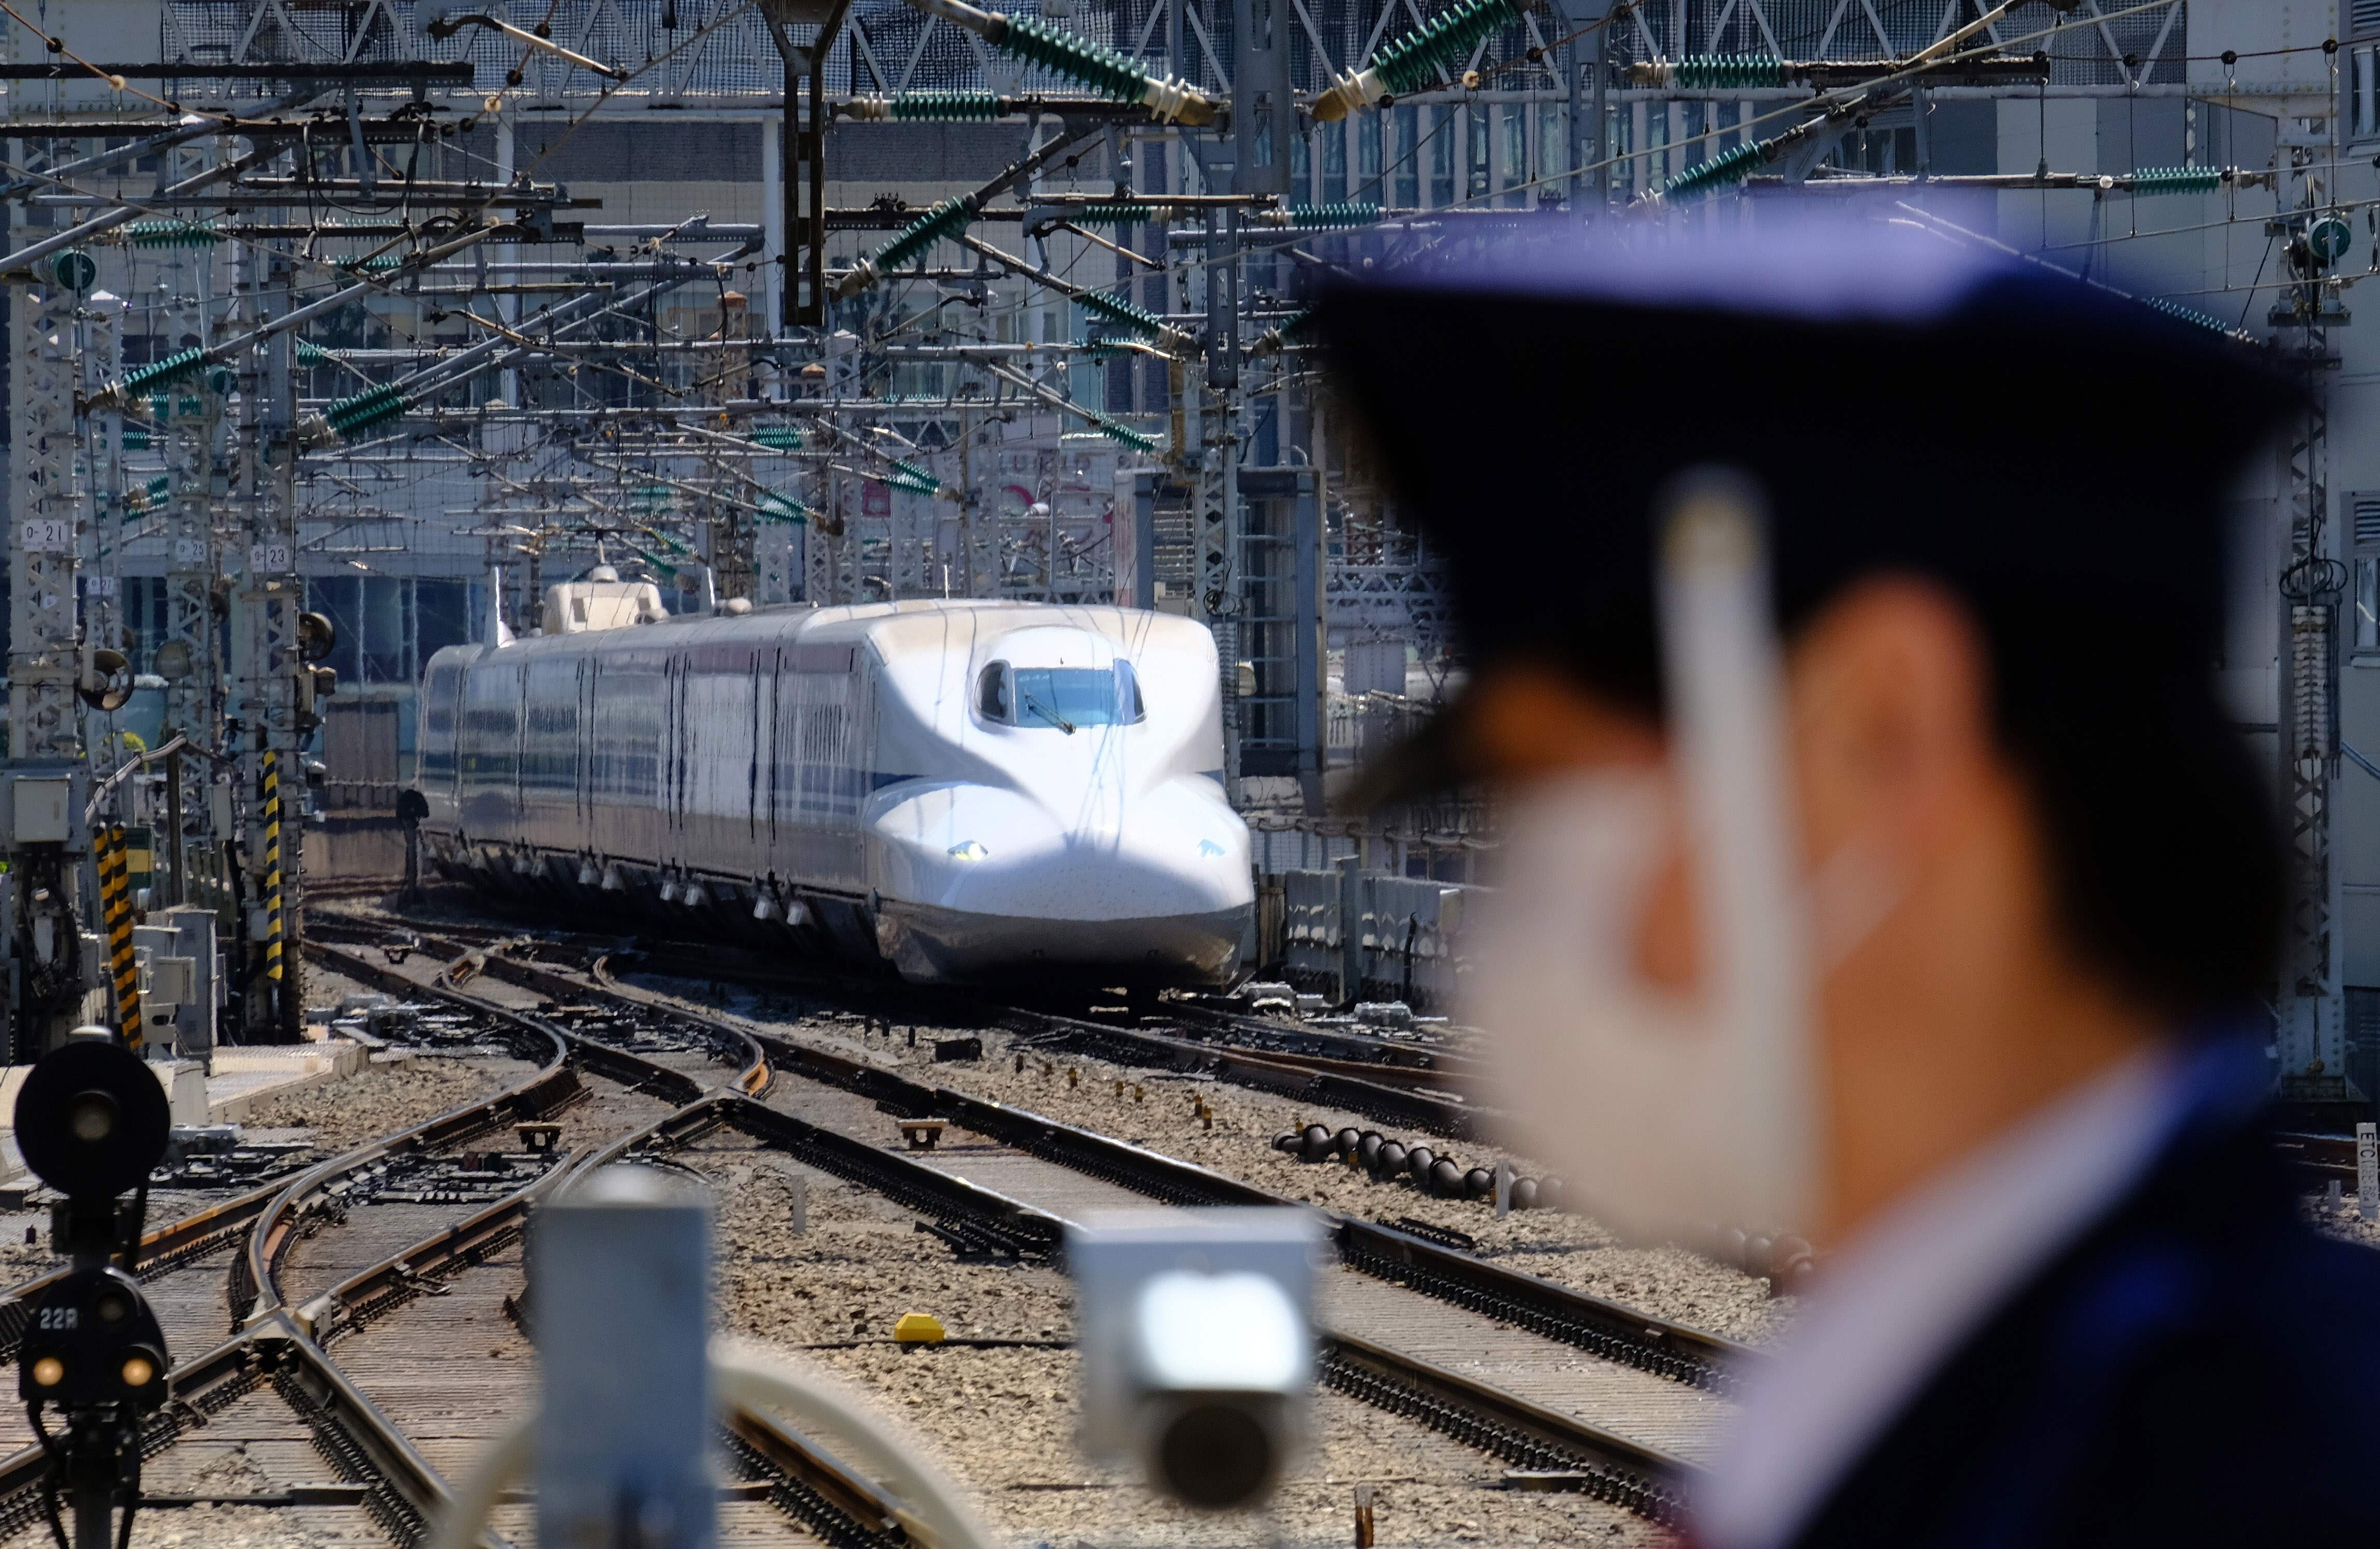 A security guard wearing a face mask stands in front of a Shinkansen bullet train upon its arrival at Tokyo Station on April 25. Photo: AFP